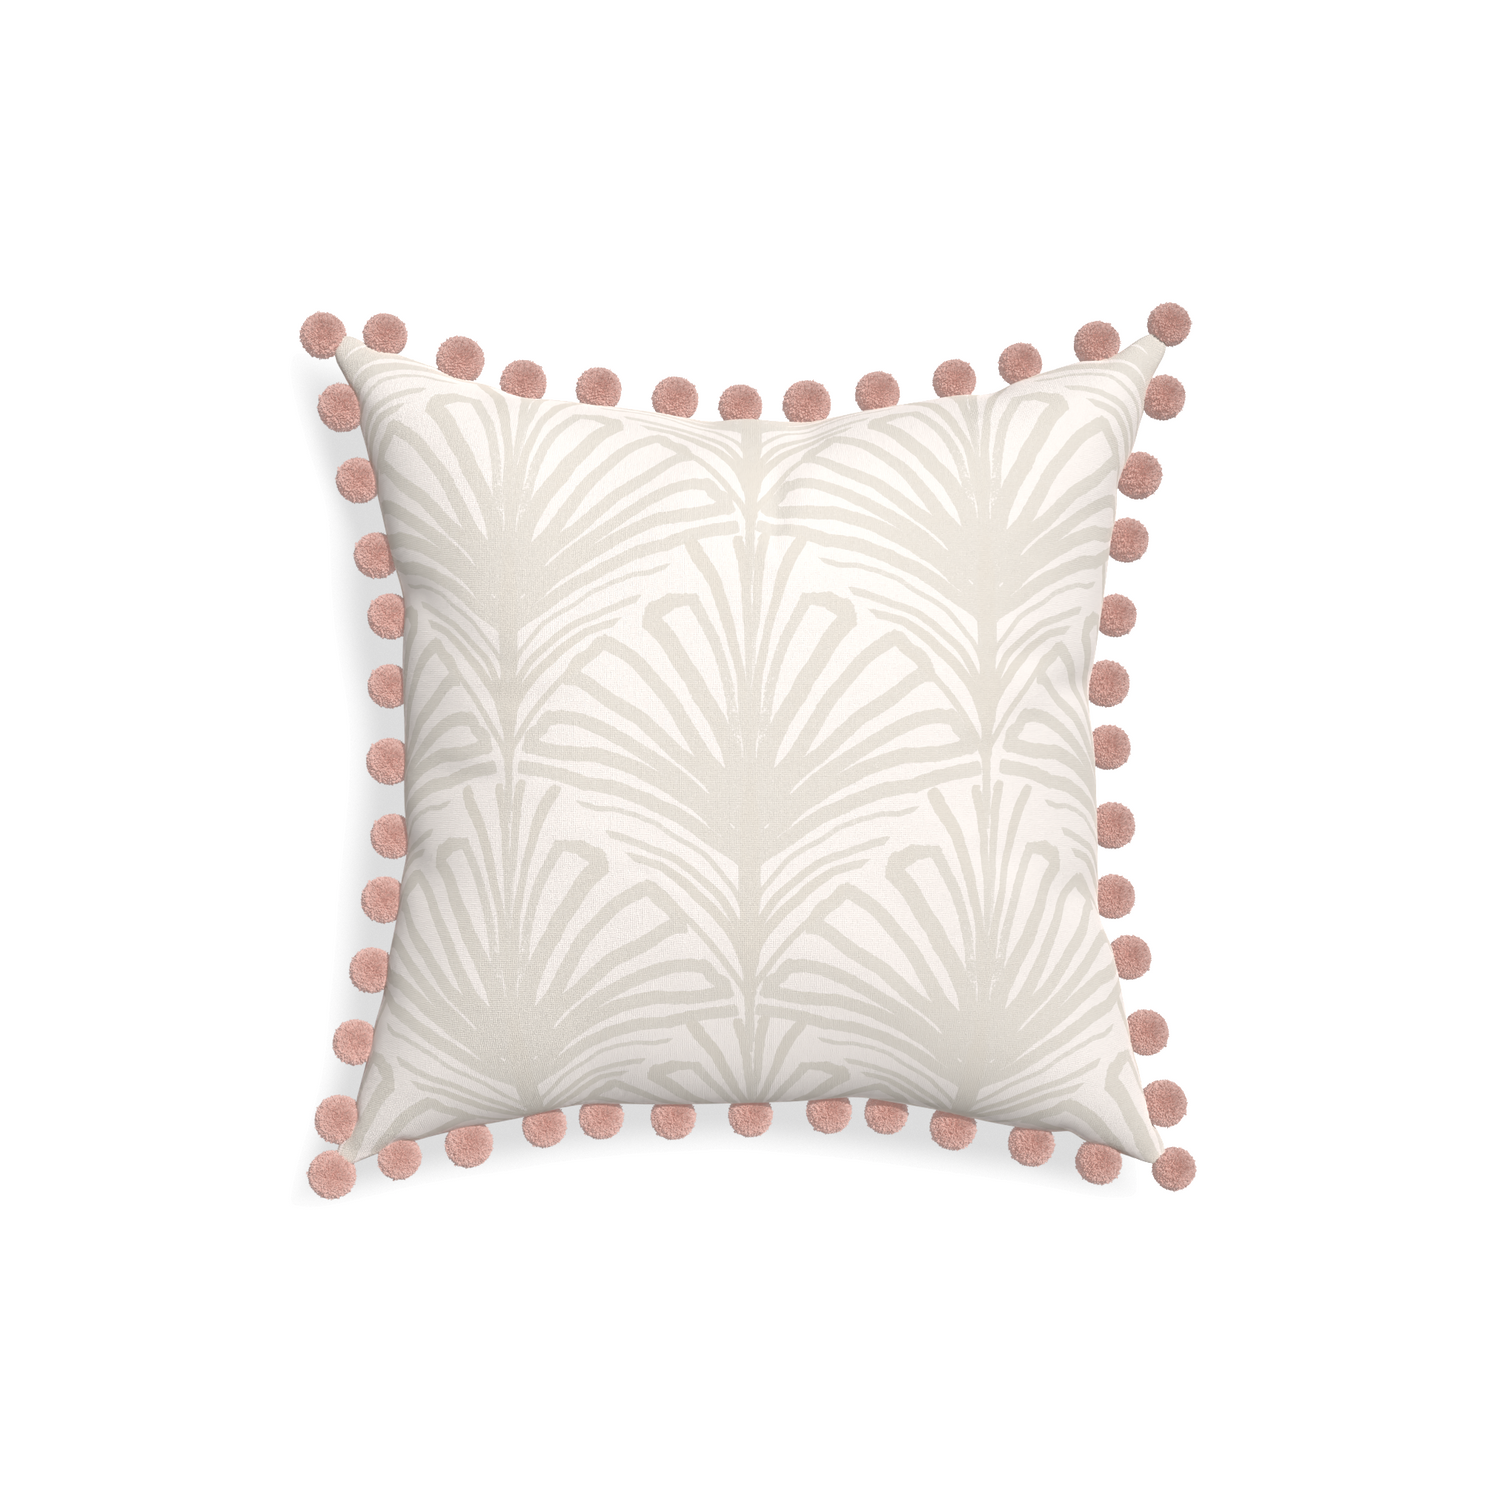 18-square suzy sand custom beige palmpillow with rose pom pom on white background